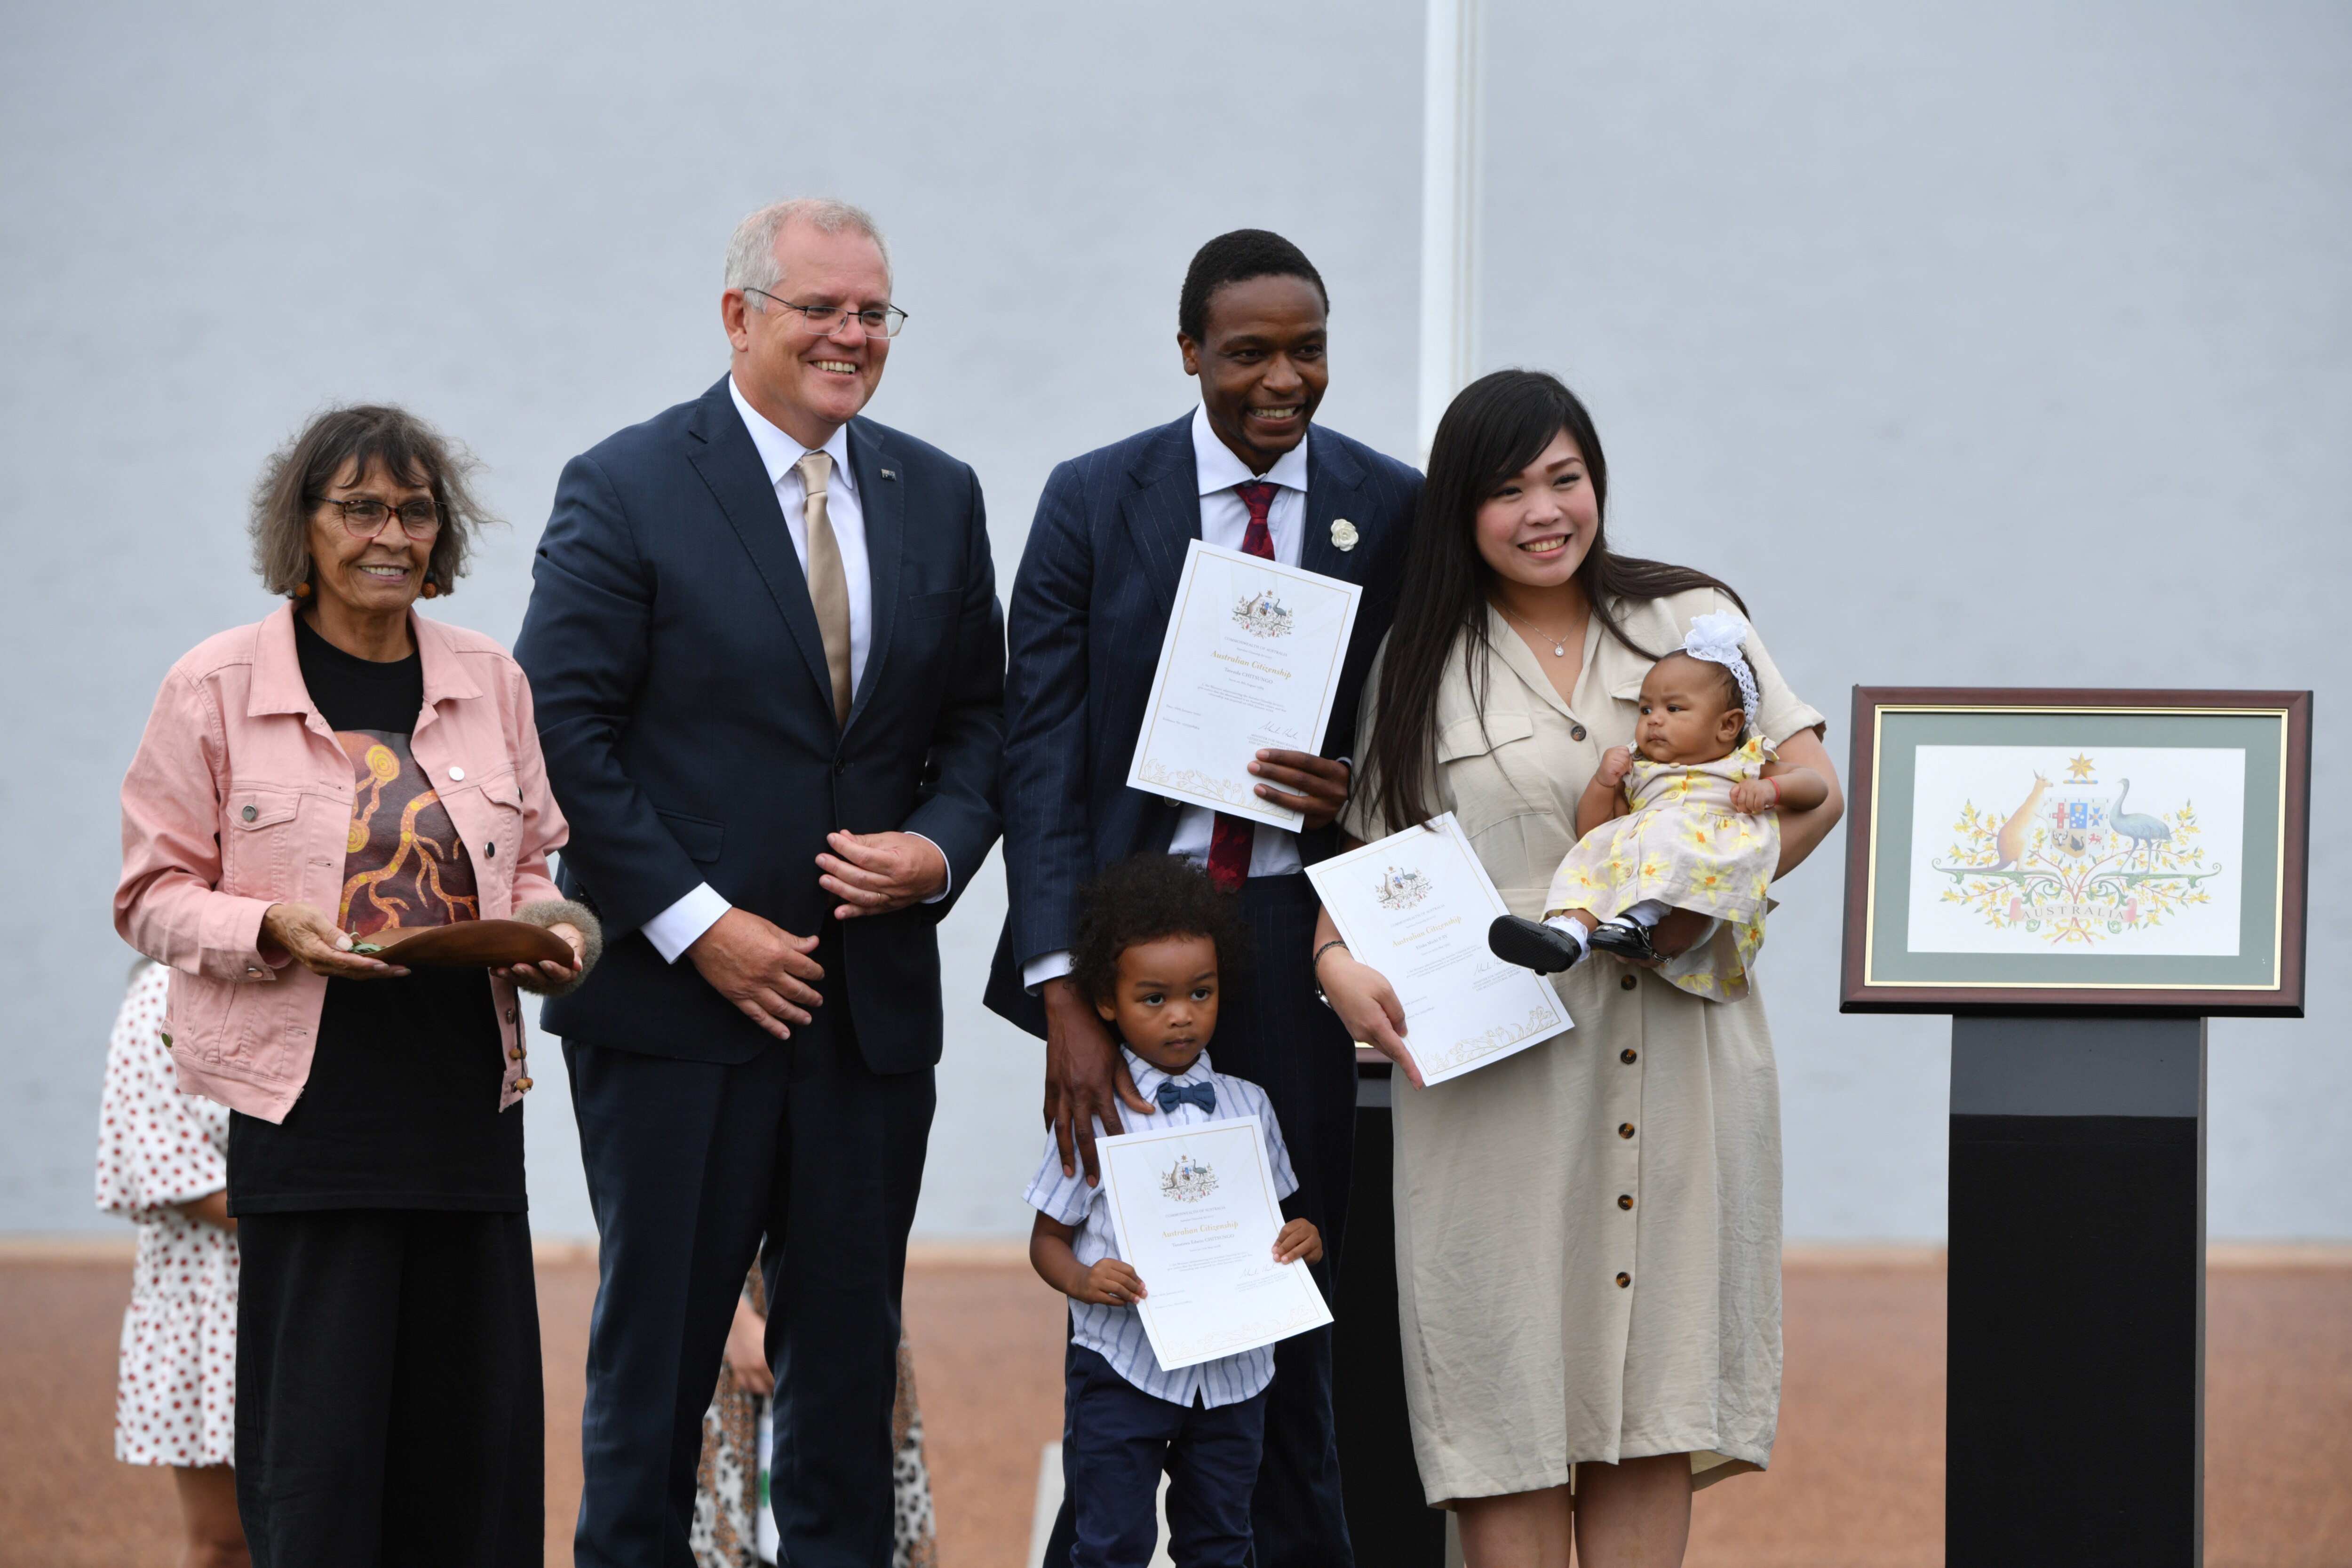 Prime Minister Scott Morrison poses for photos with new citizens Tatenda Chitsungo (third from left), wife Eliska Sy and their children.